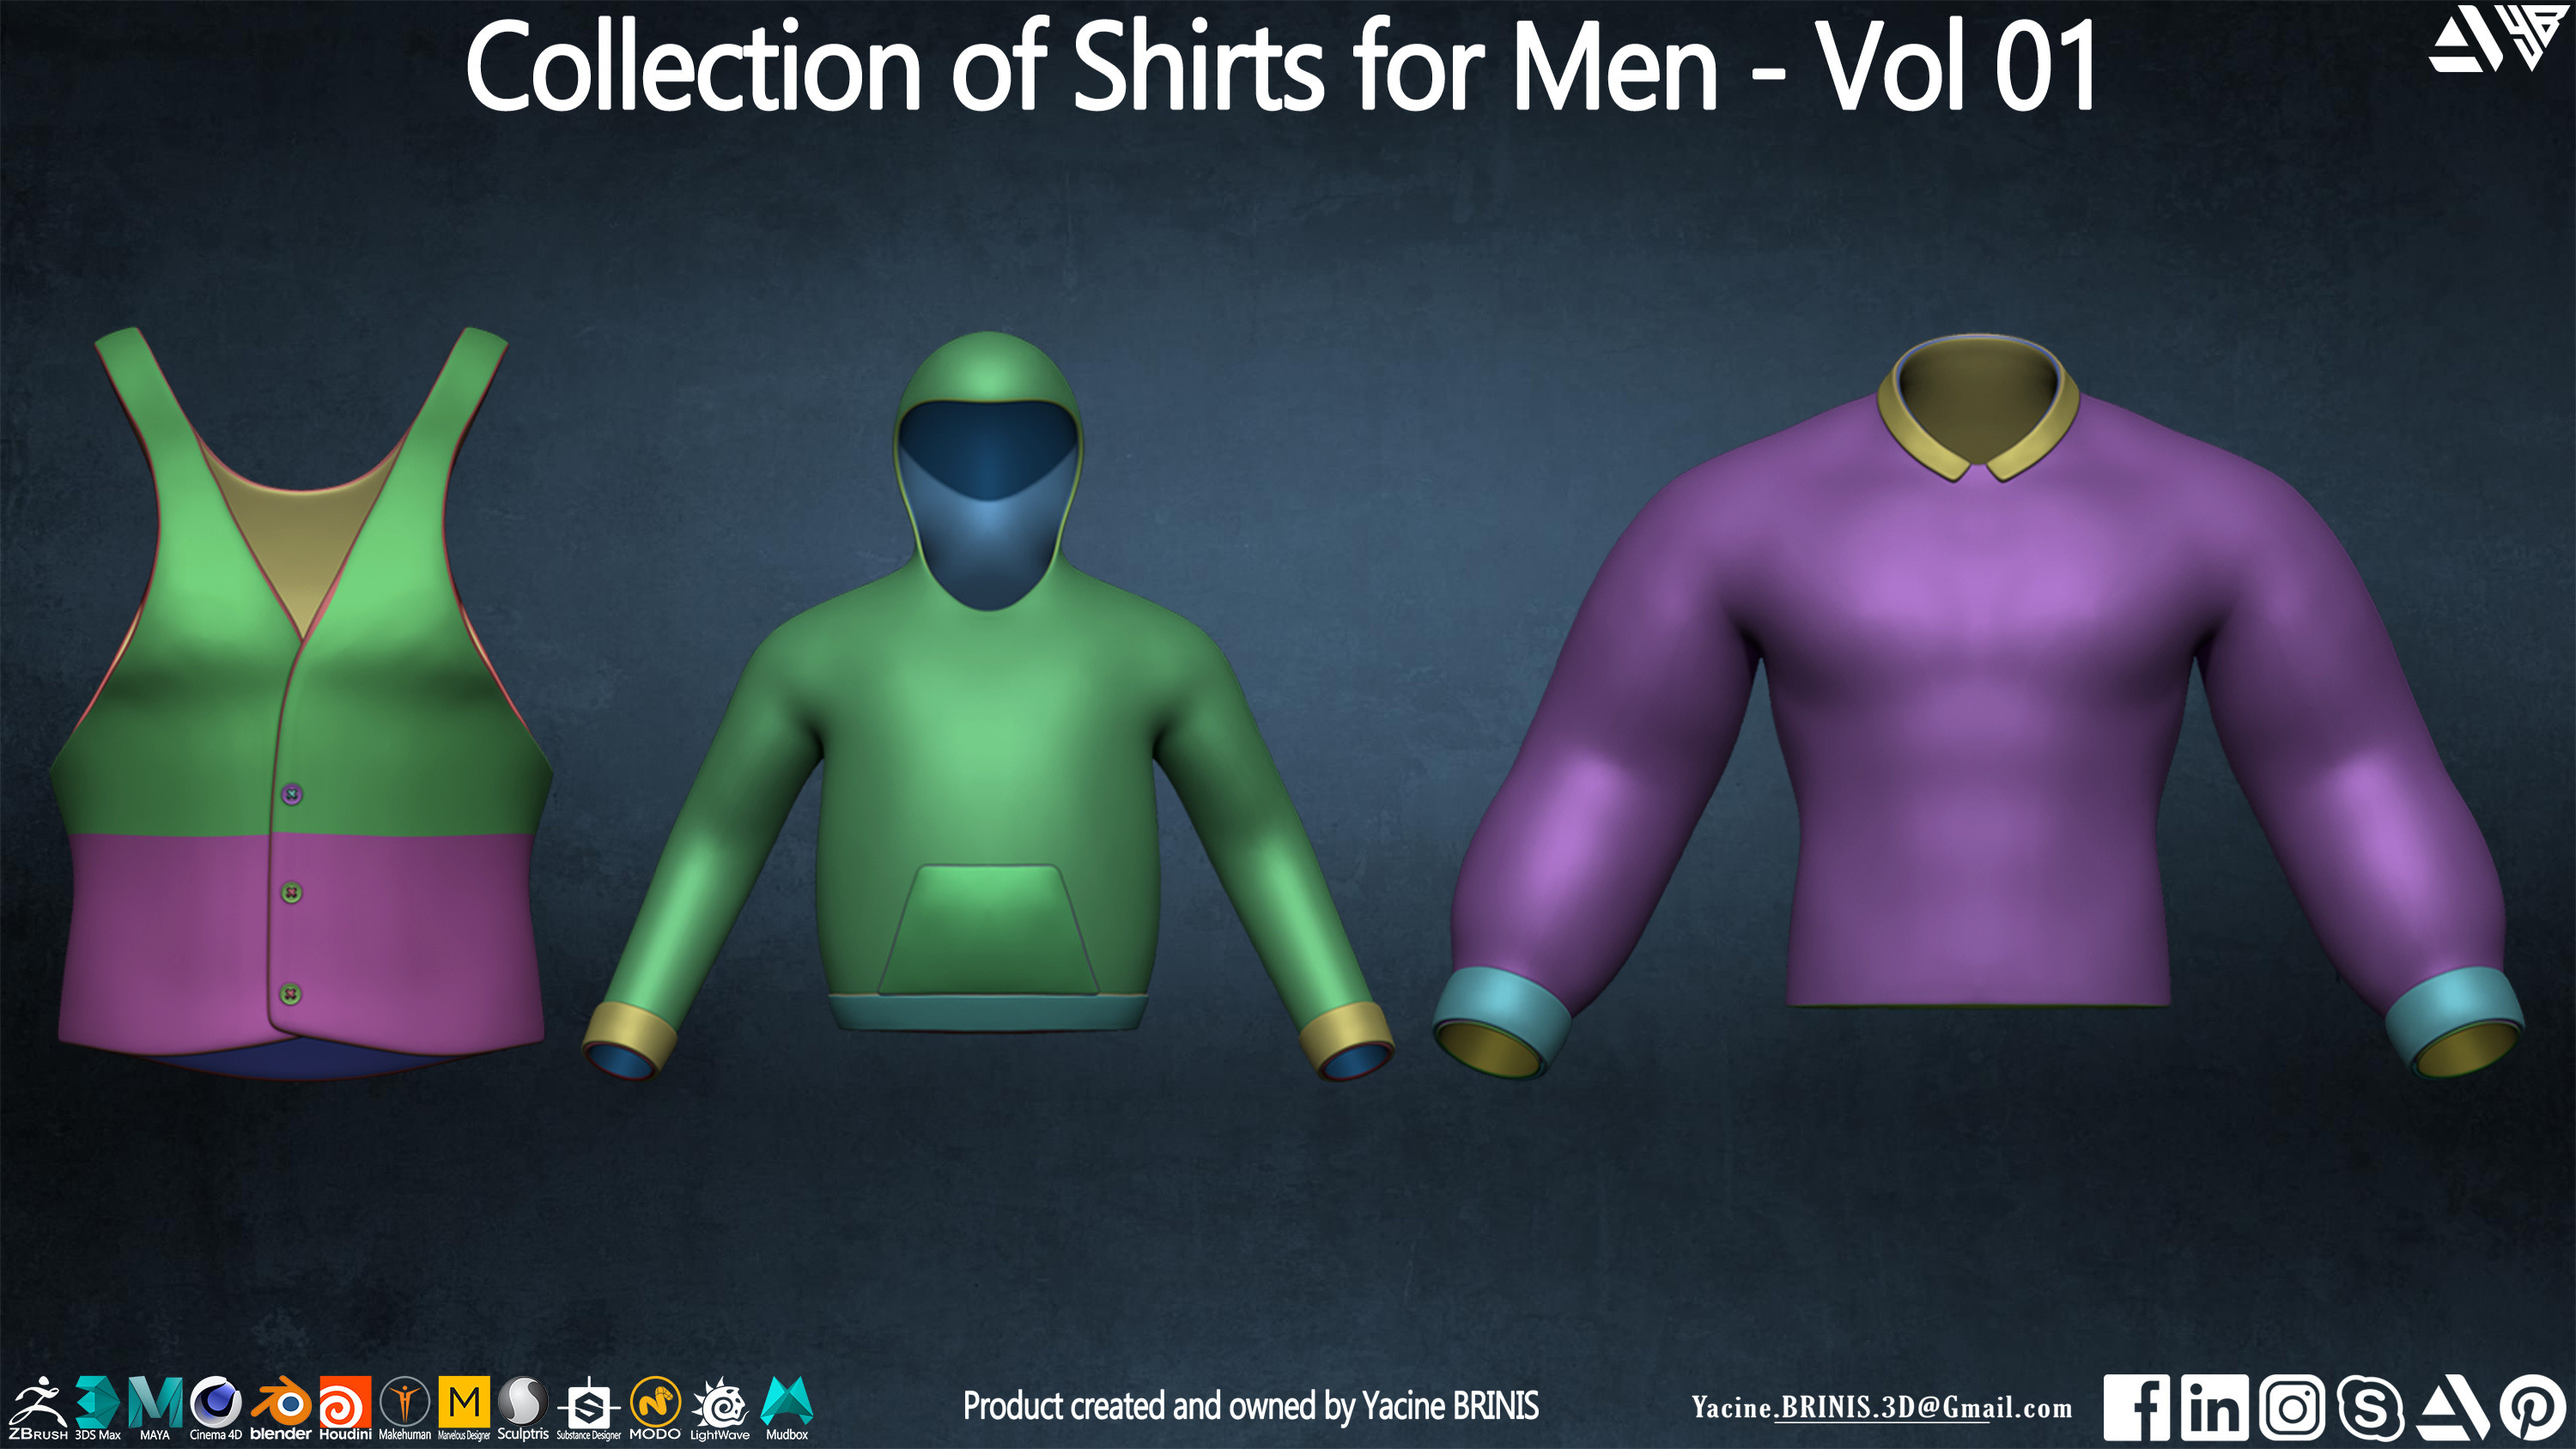 Collection of Shirts for Men - Volume 01 By Yacine BRINIS - 003